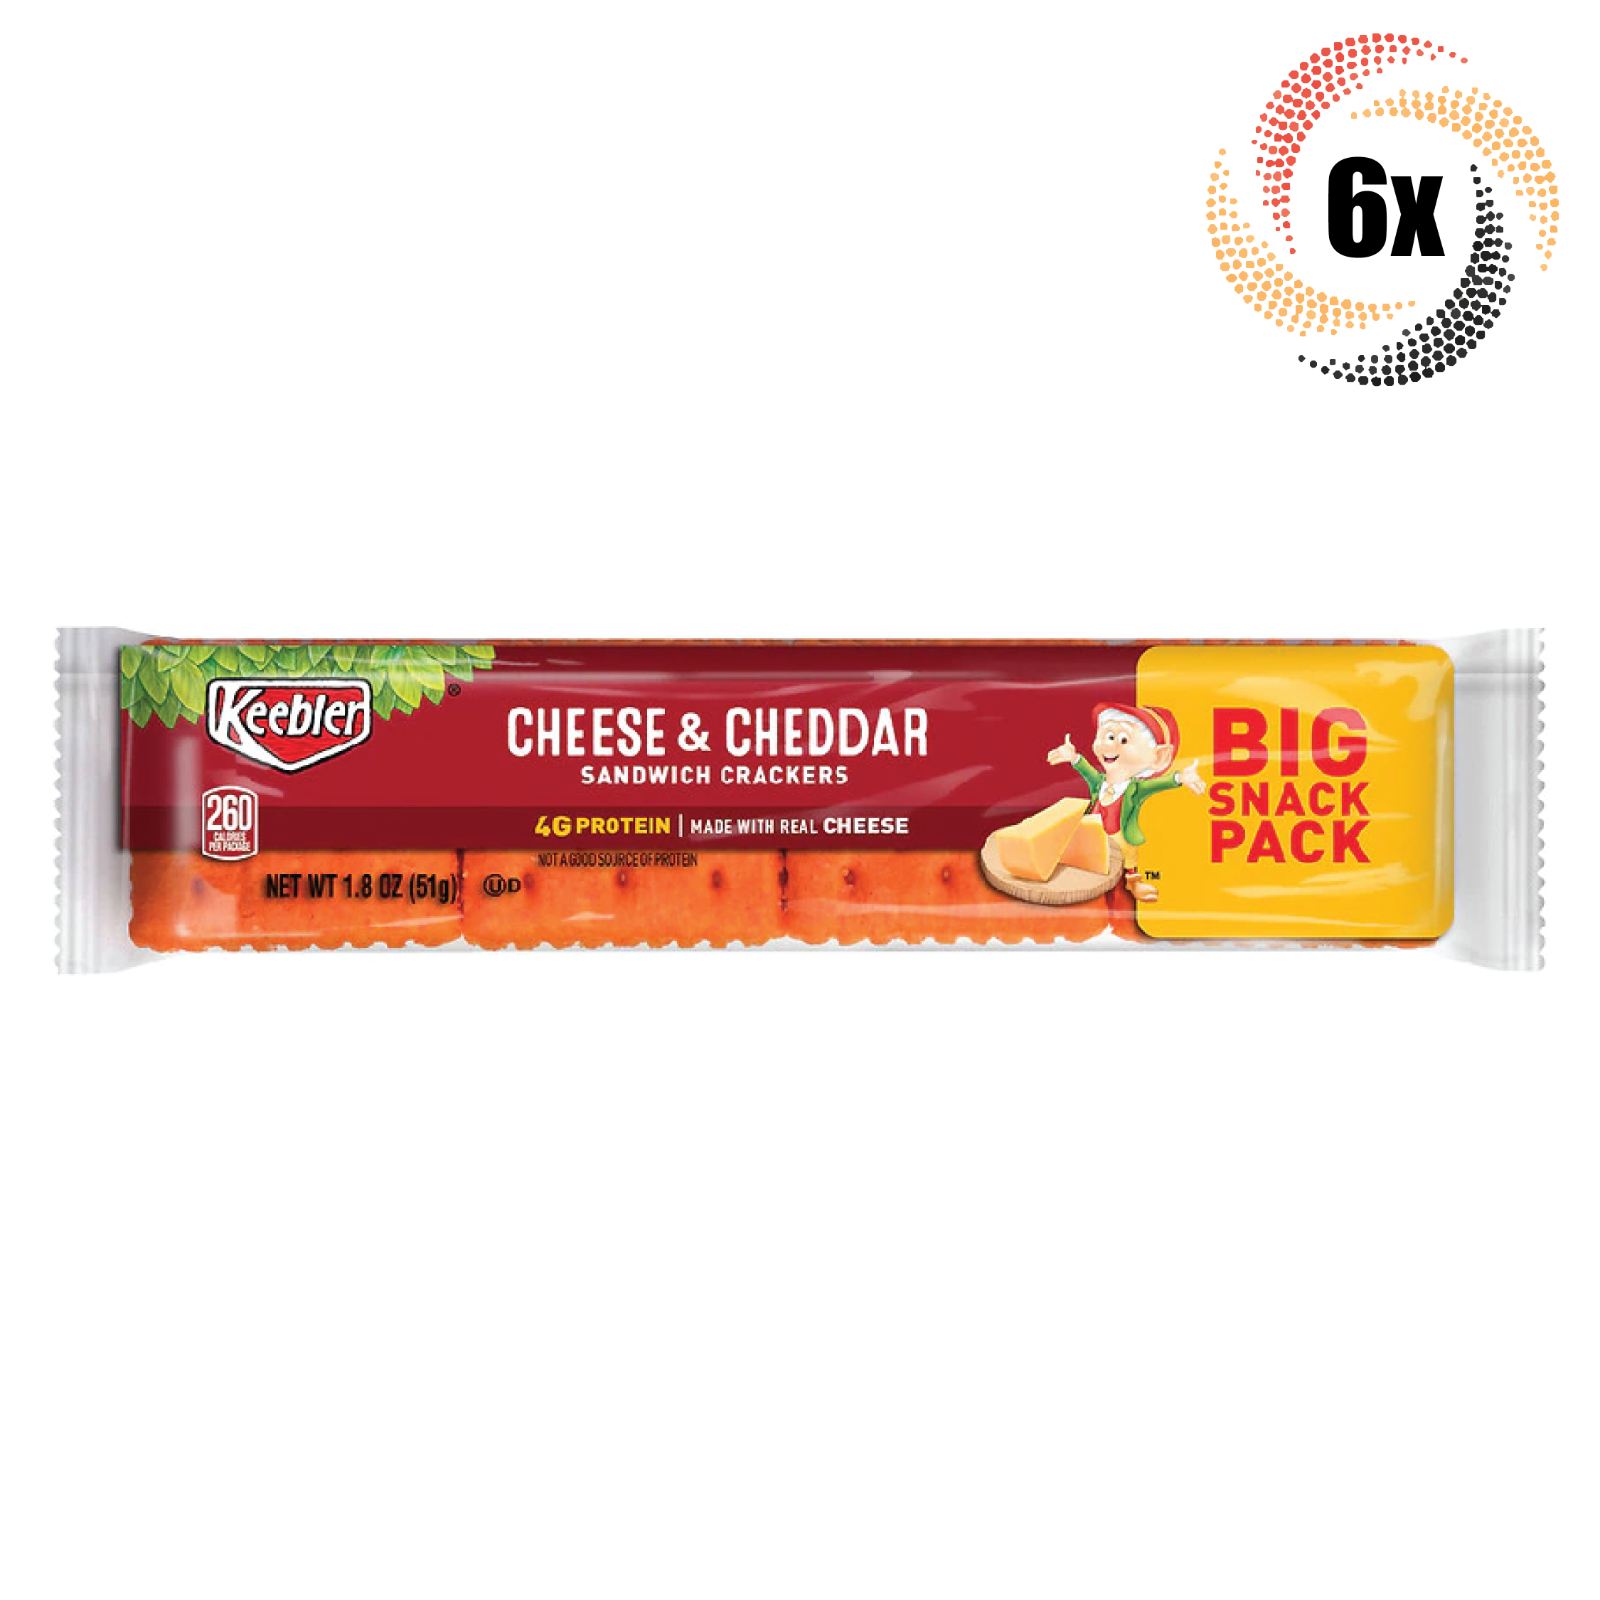 6x Packs Keebler Cheese & Cheddar Sandwich Crackers 1.8oz ( Fast Shipping! ) - $14.49